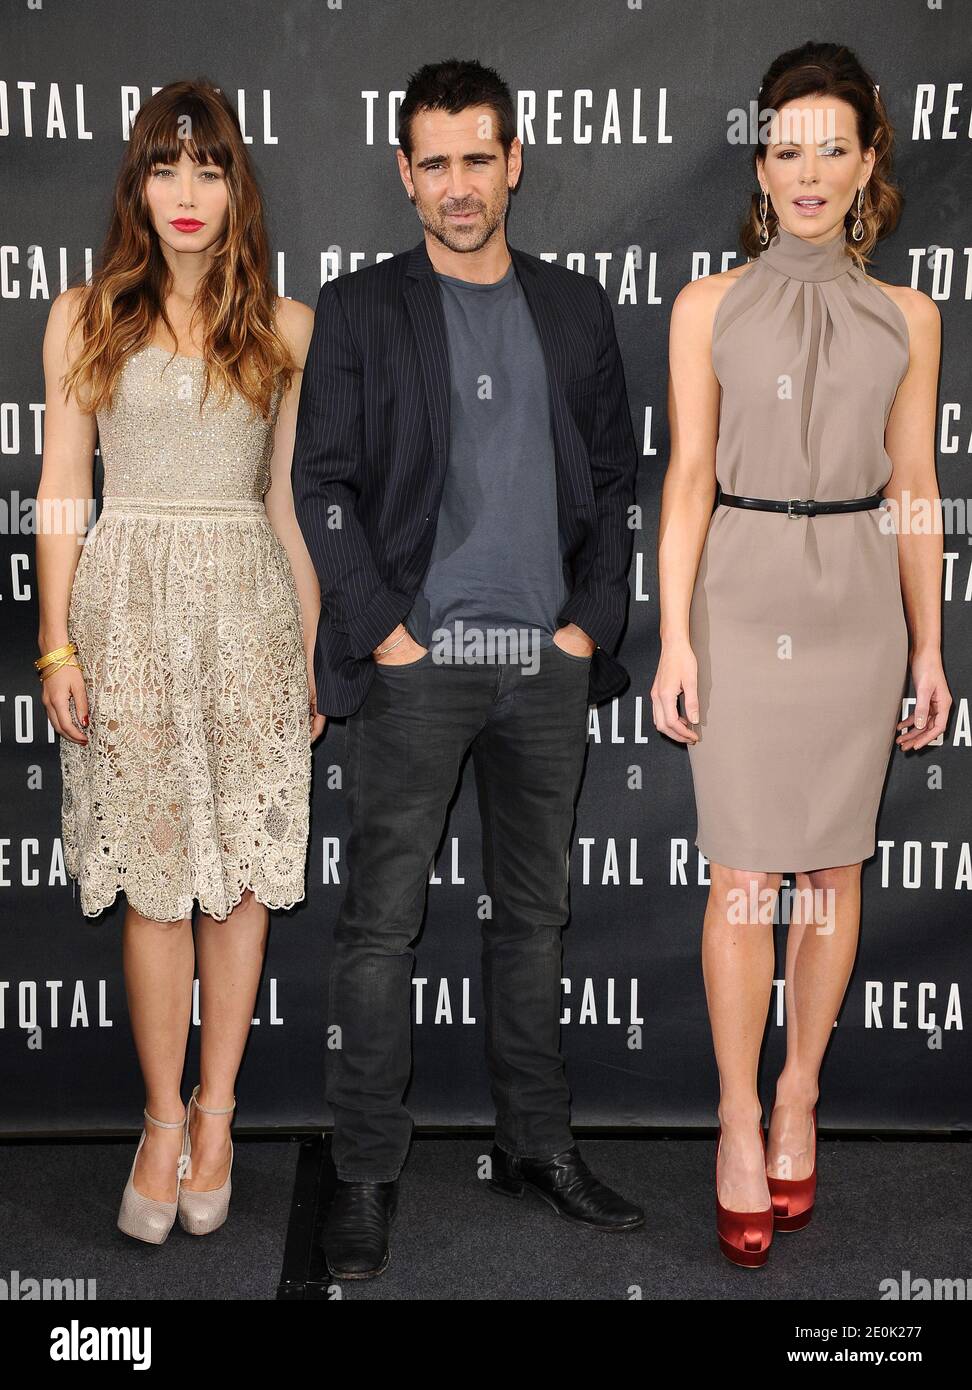 Jessica Biel Colin Farrell And Kate Beckinsale Pose At The Total Recall Photo Call Held At